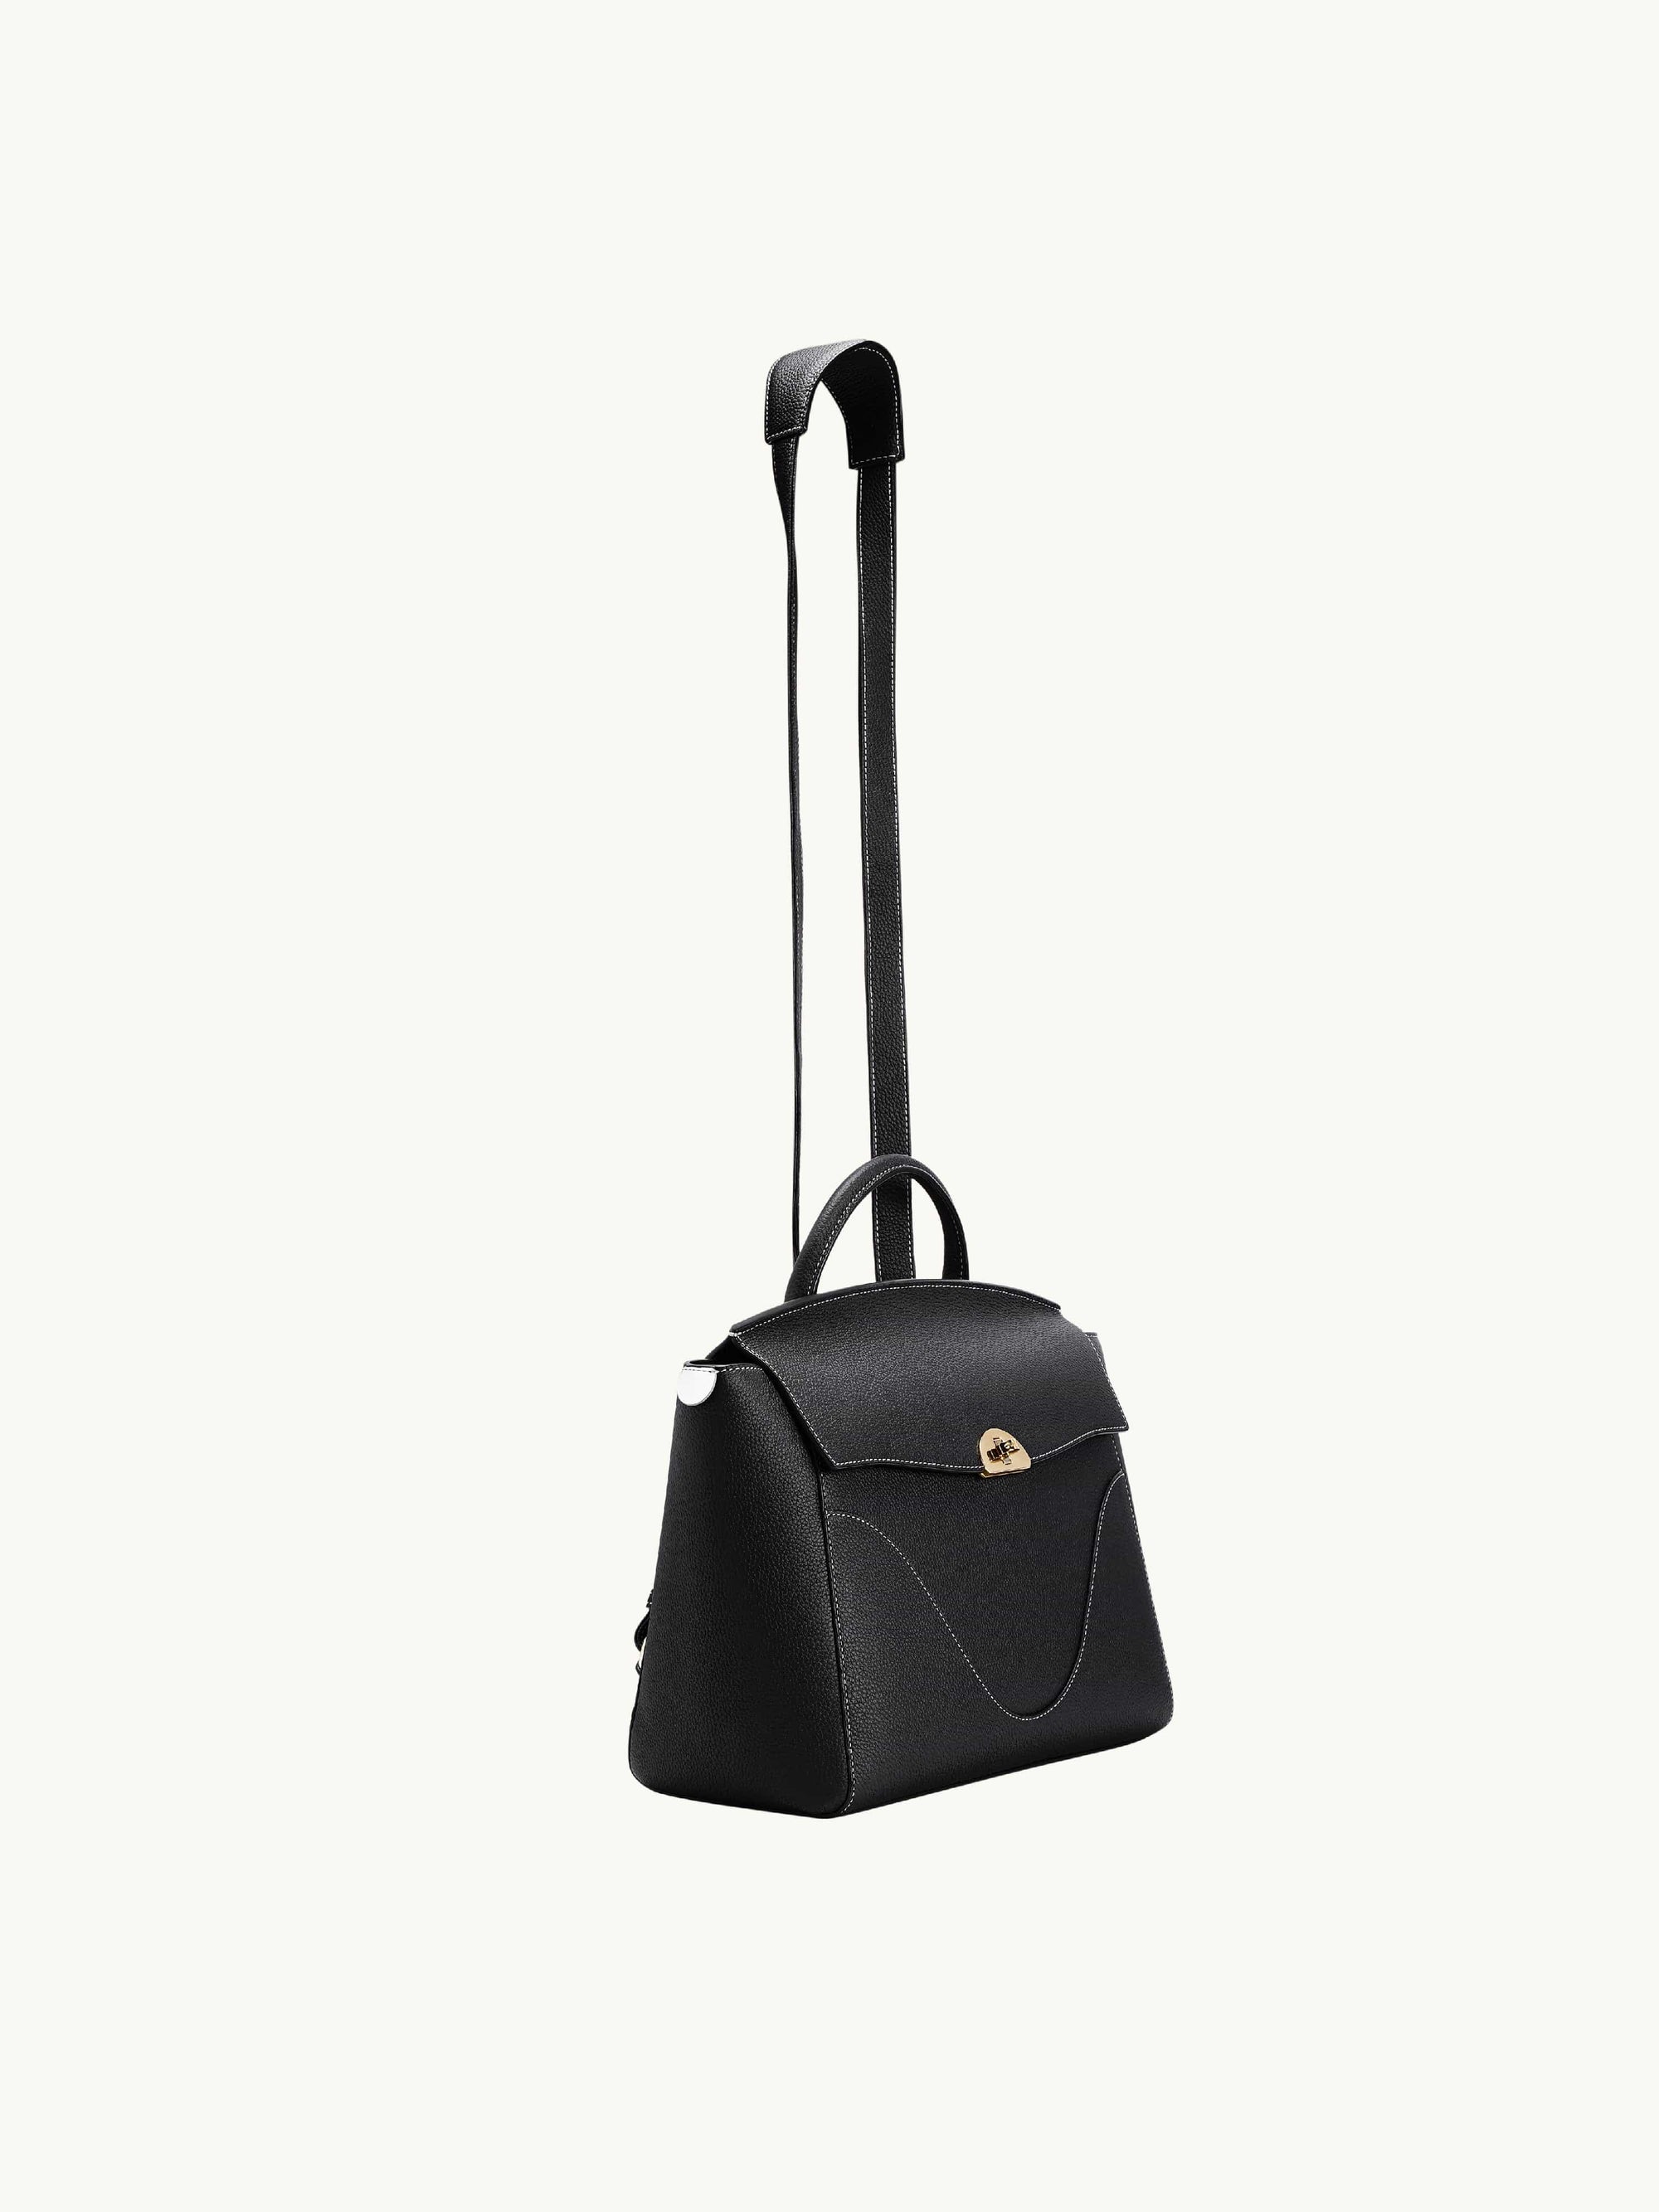 Been looking for this bag in SG and TW. I'm glad they have a stock in , YSL Bags